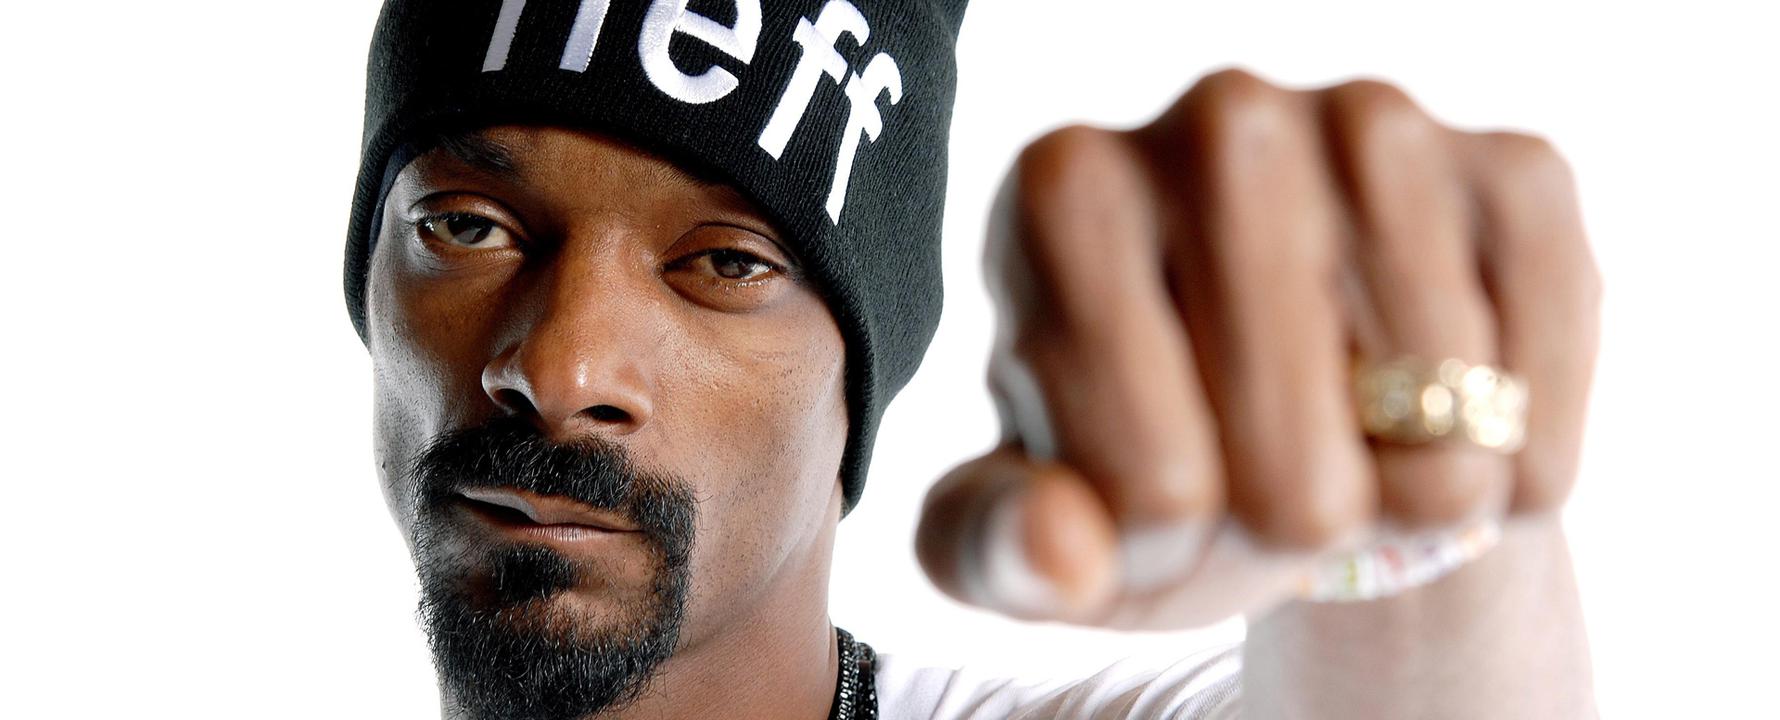 Promotional photograph of Snoop Dogg.